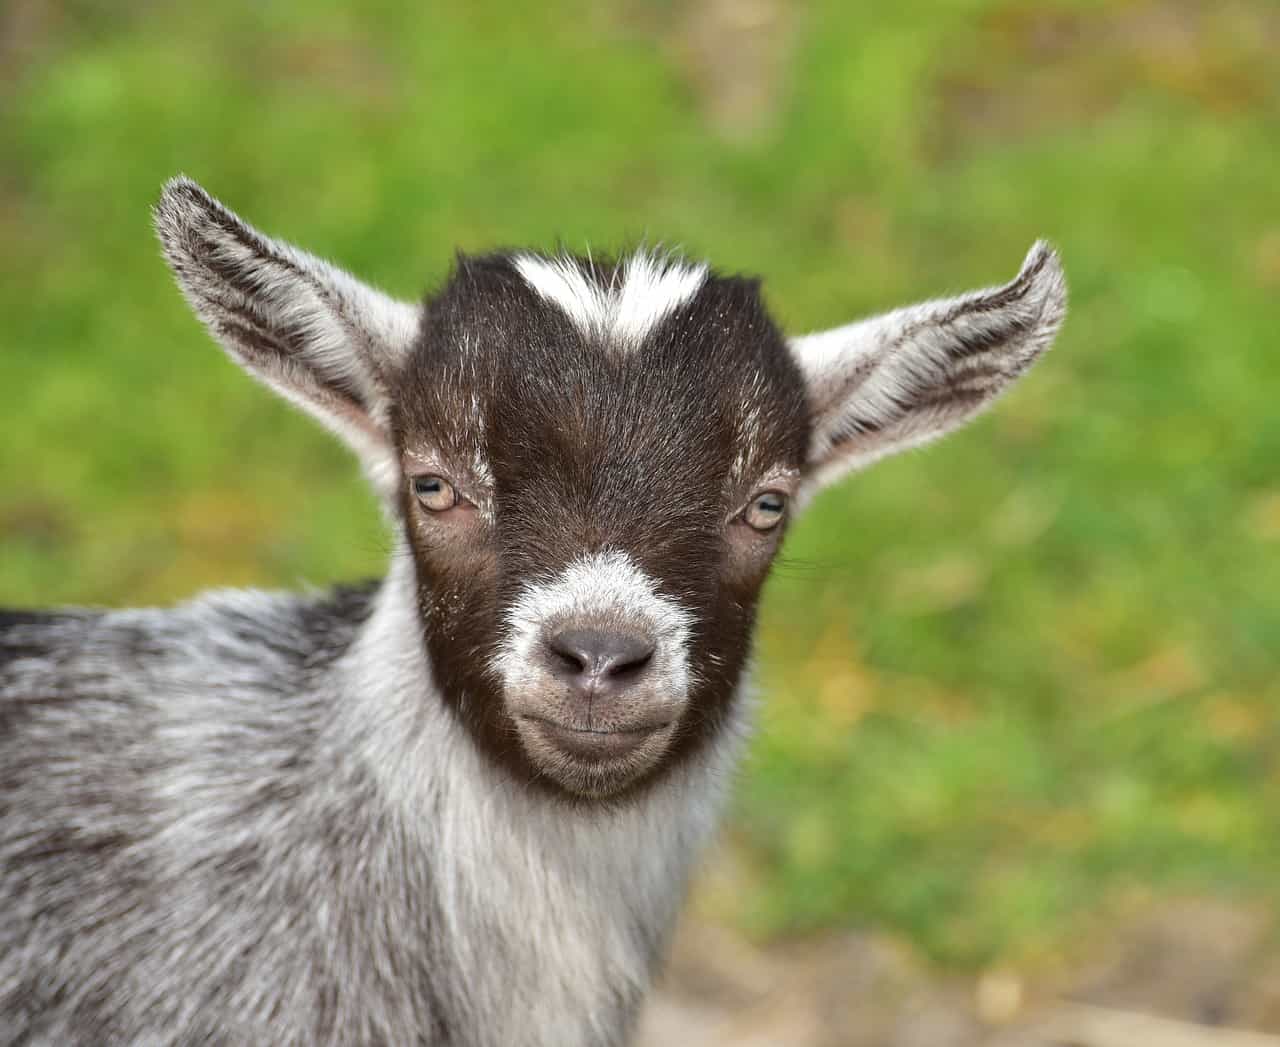 Have You or Someone You Know Ever Owned a Pygmy Goat?